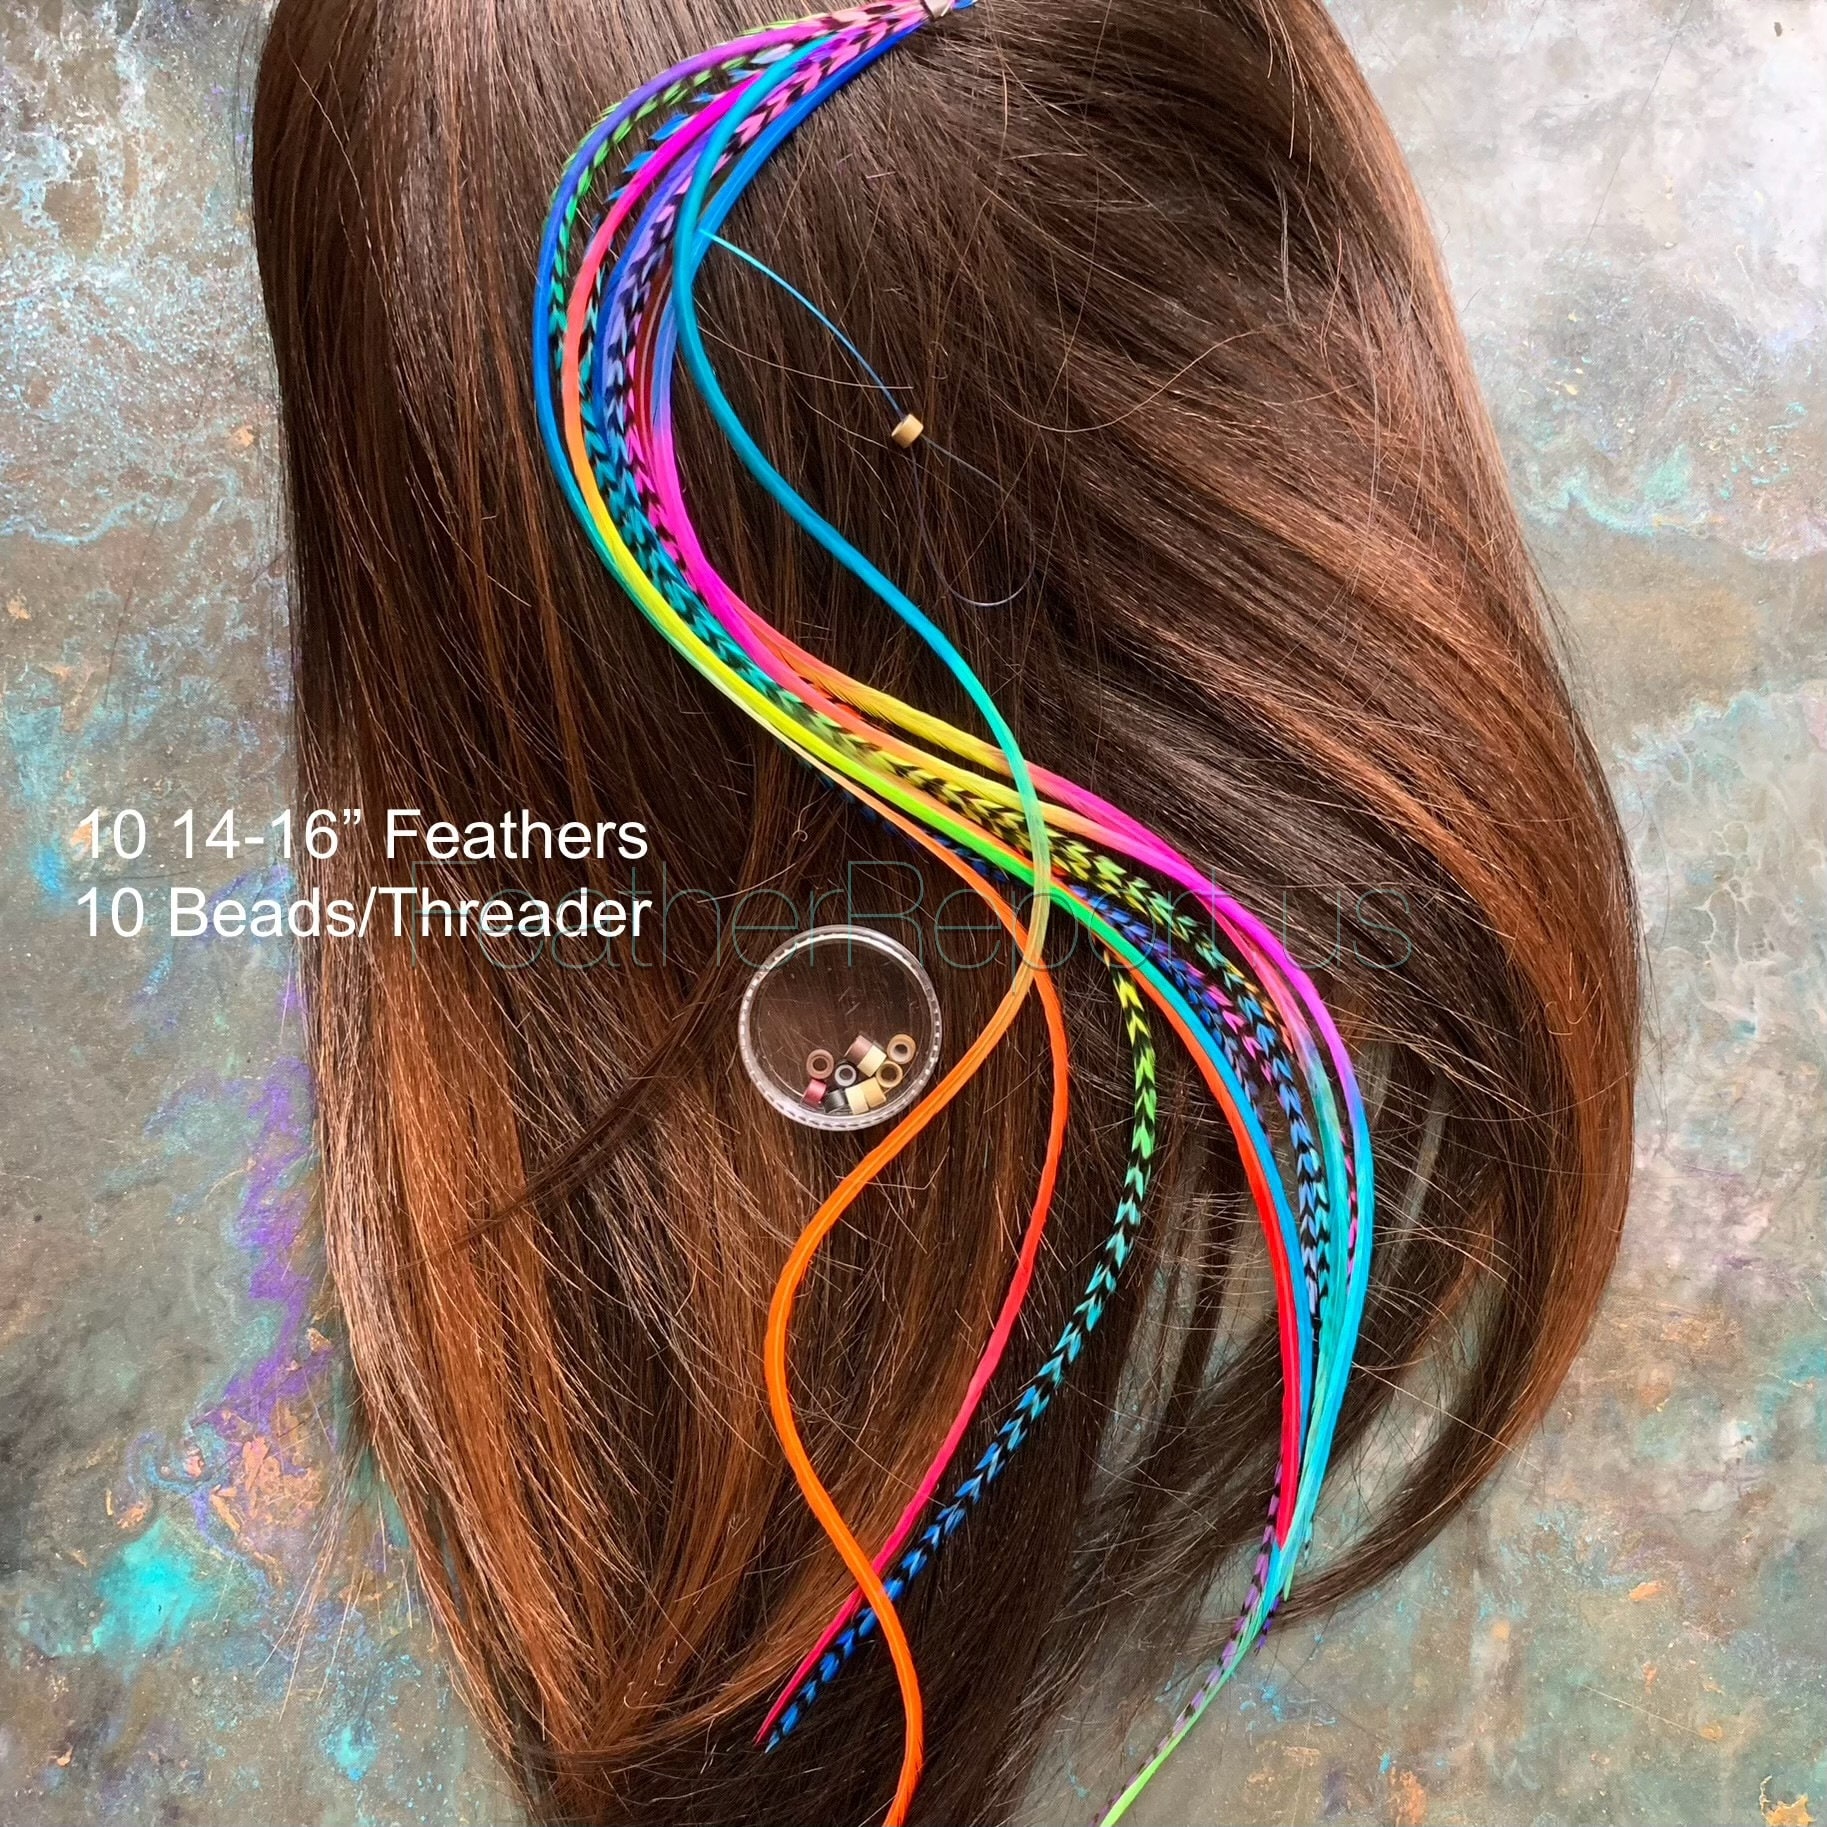 Hair Feather Kit XL Salon Extension Feathers Rooster Feathers Dyed All Colors Starter Pack Long Hair Accessory Feathers for Hair 25pc